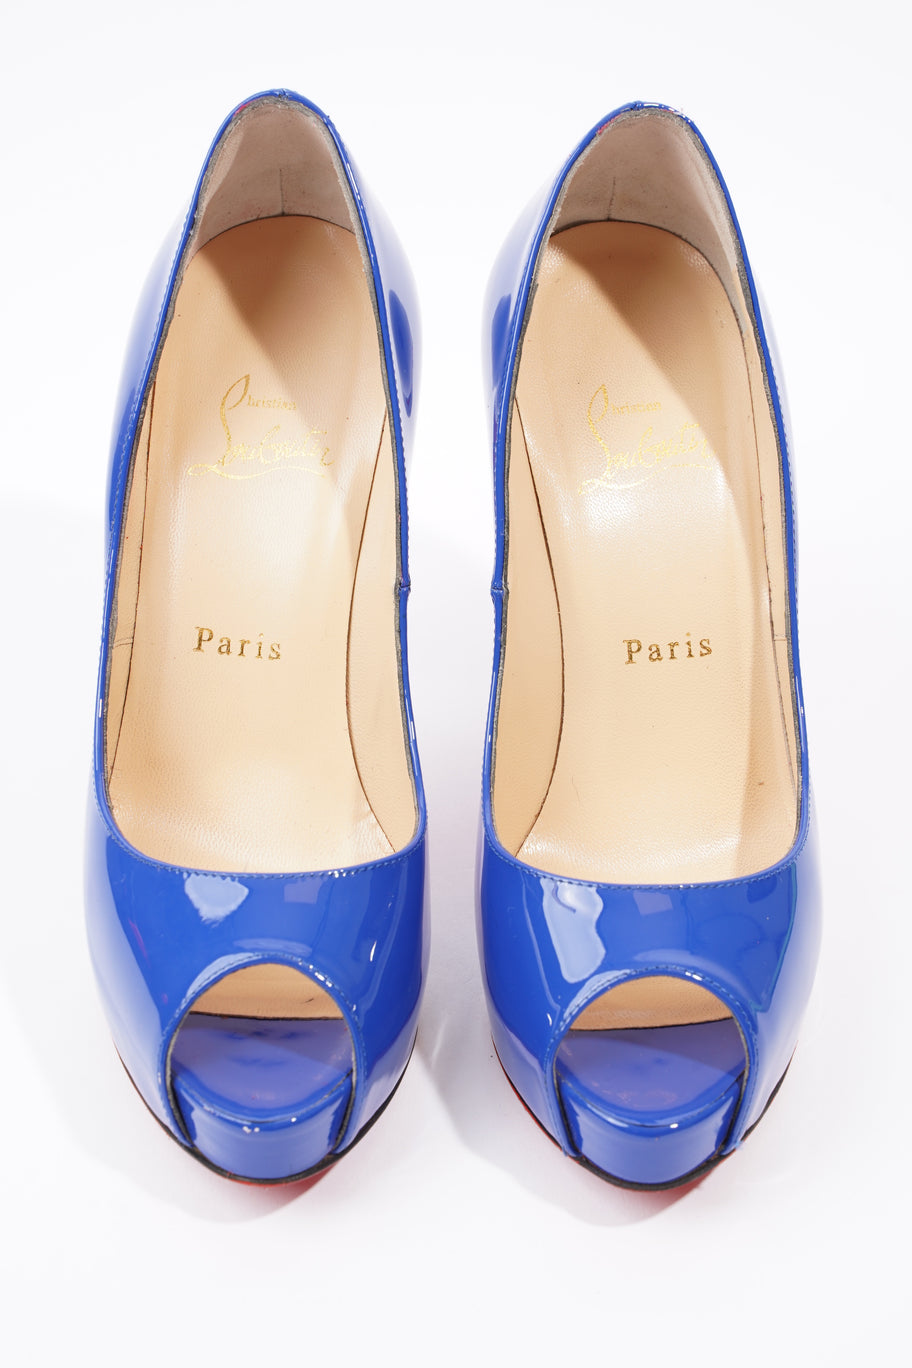 New Very Prive Heels 120 Blue Patent Leather EU 37.5 UK 4.5 Image 8